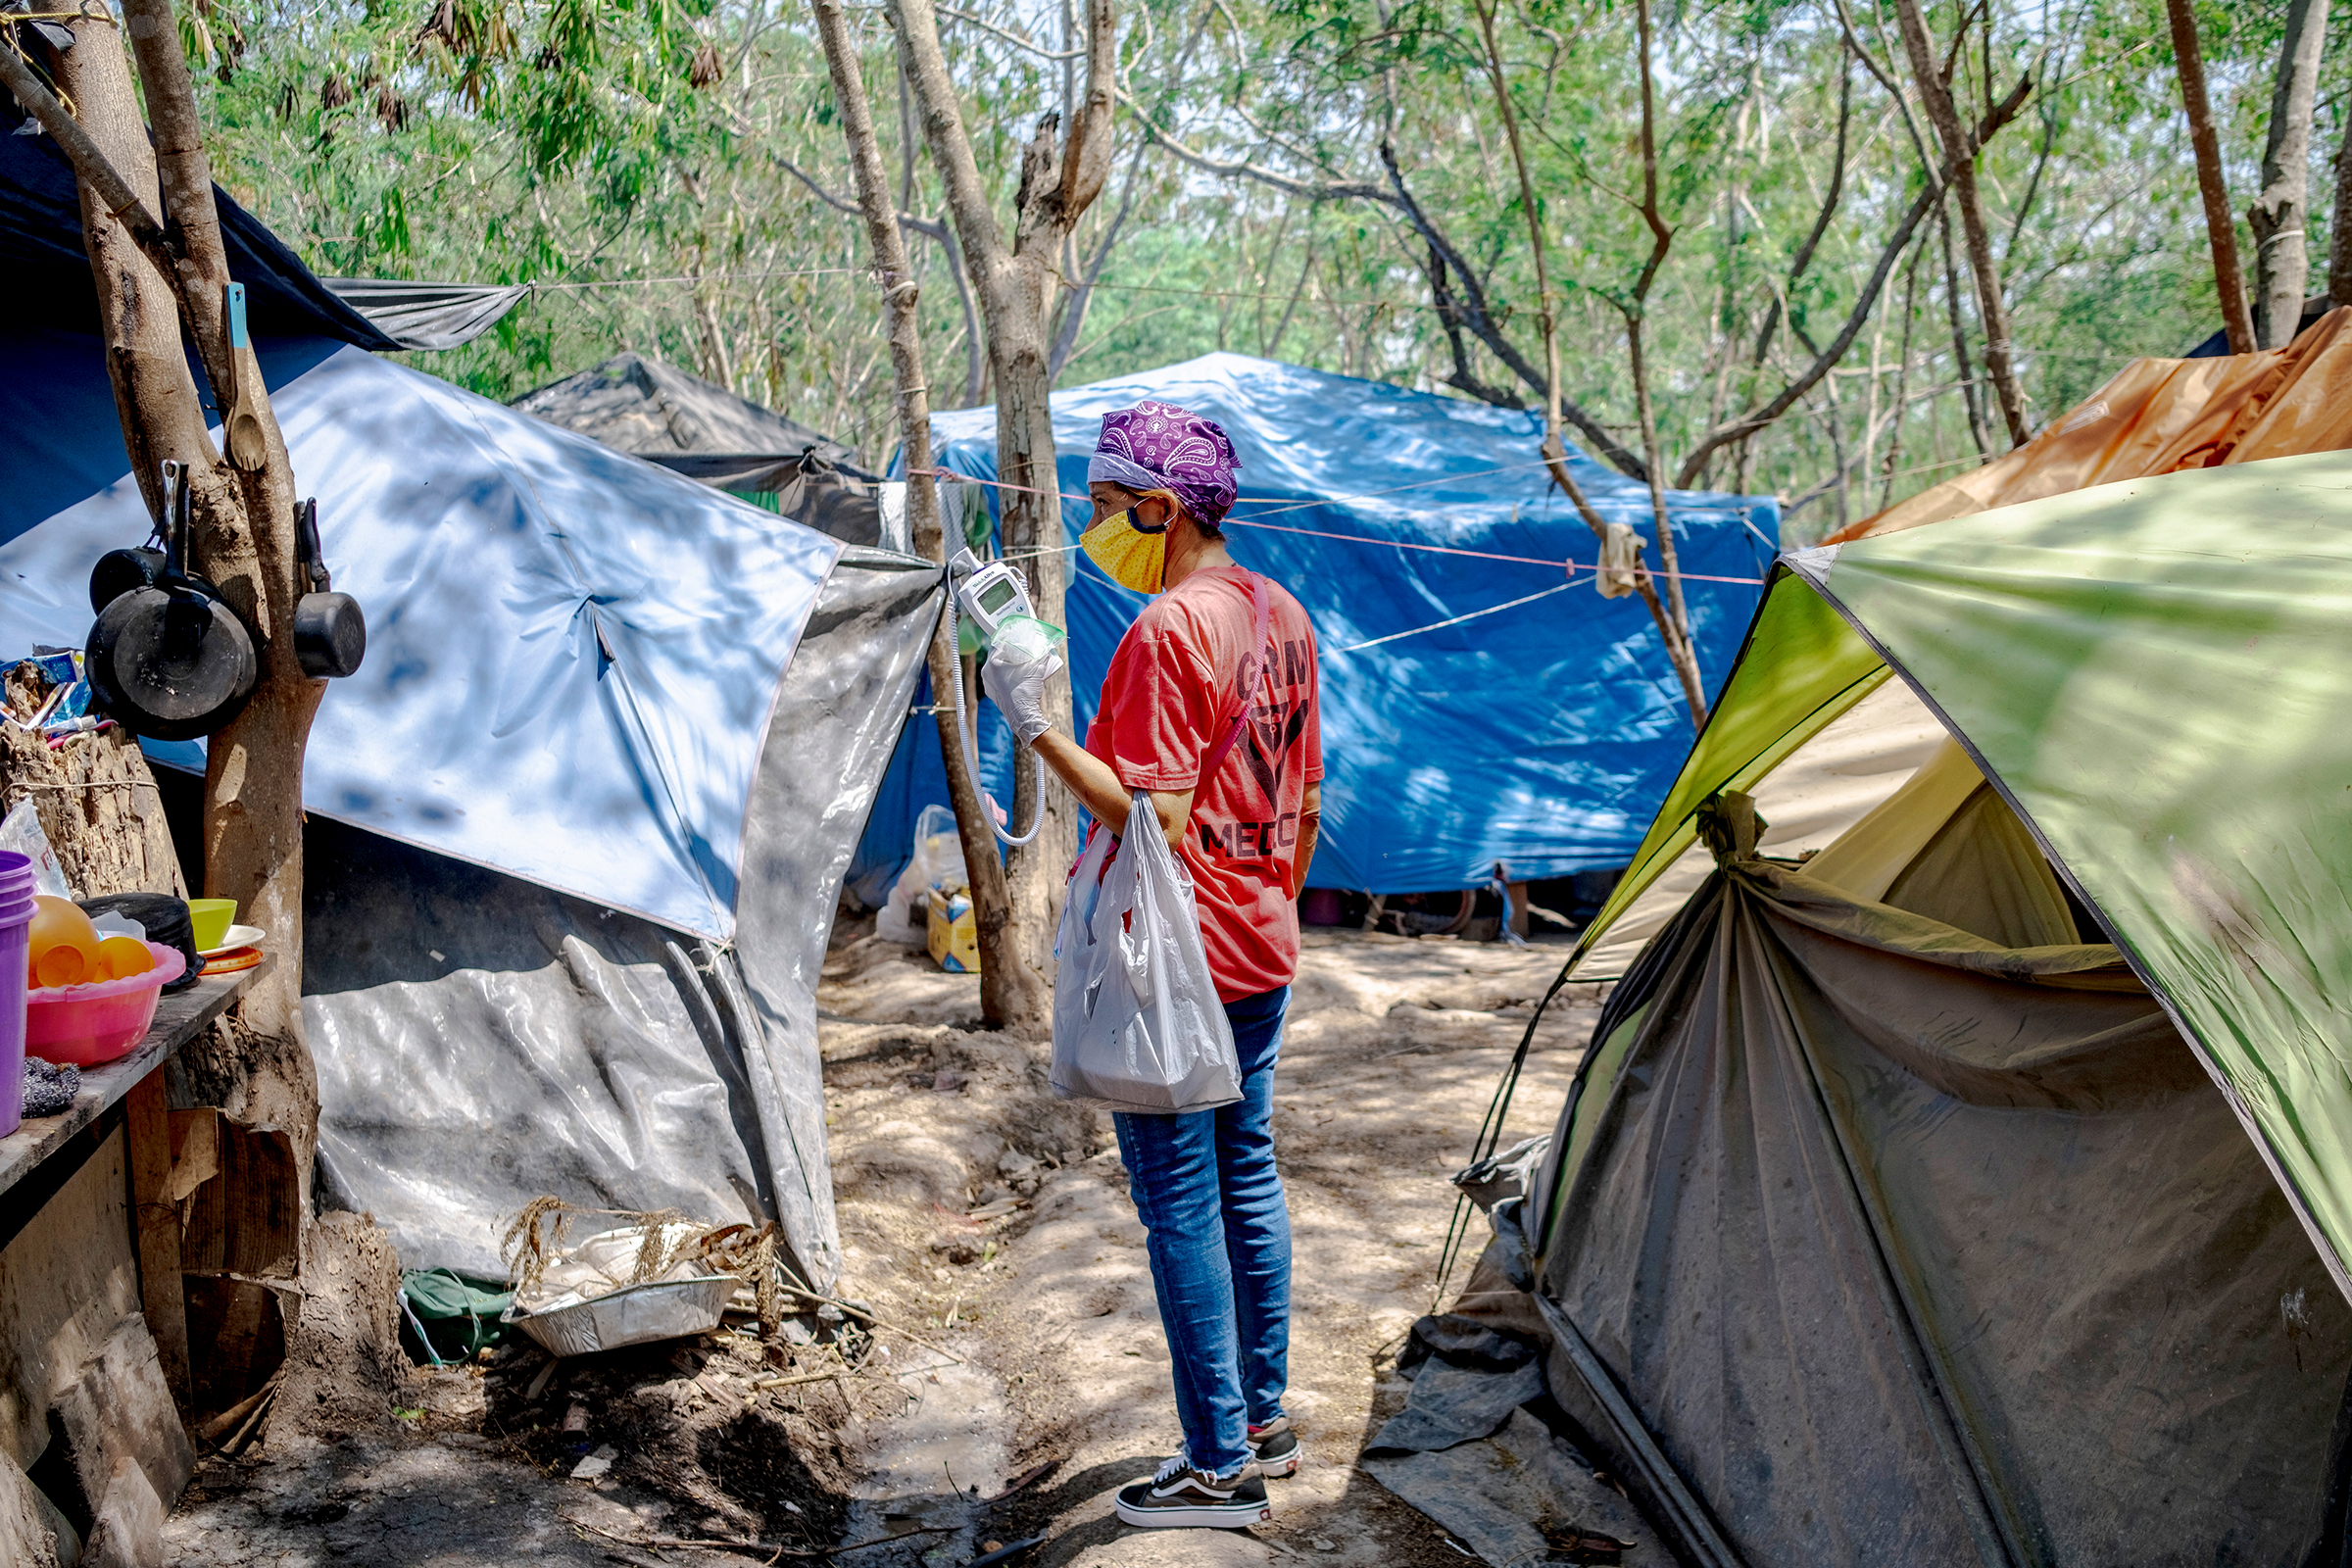 A member of the Global Responses Management medical team in the Matamoros camp on April 24. "Social distancing and quarantine in refugee situations is nearly impossible," says Helen Perry, an acute care nurse practitioner and executive director of GRM. (Fred Ramos)